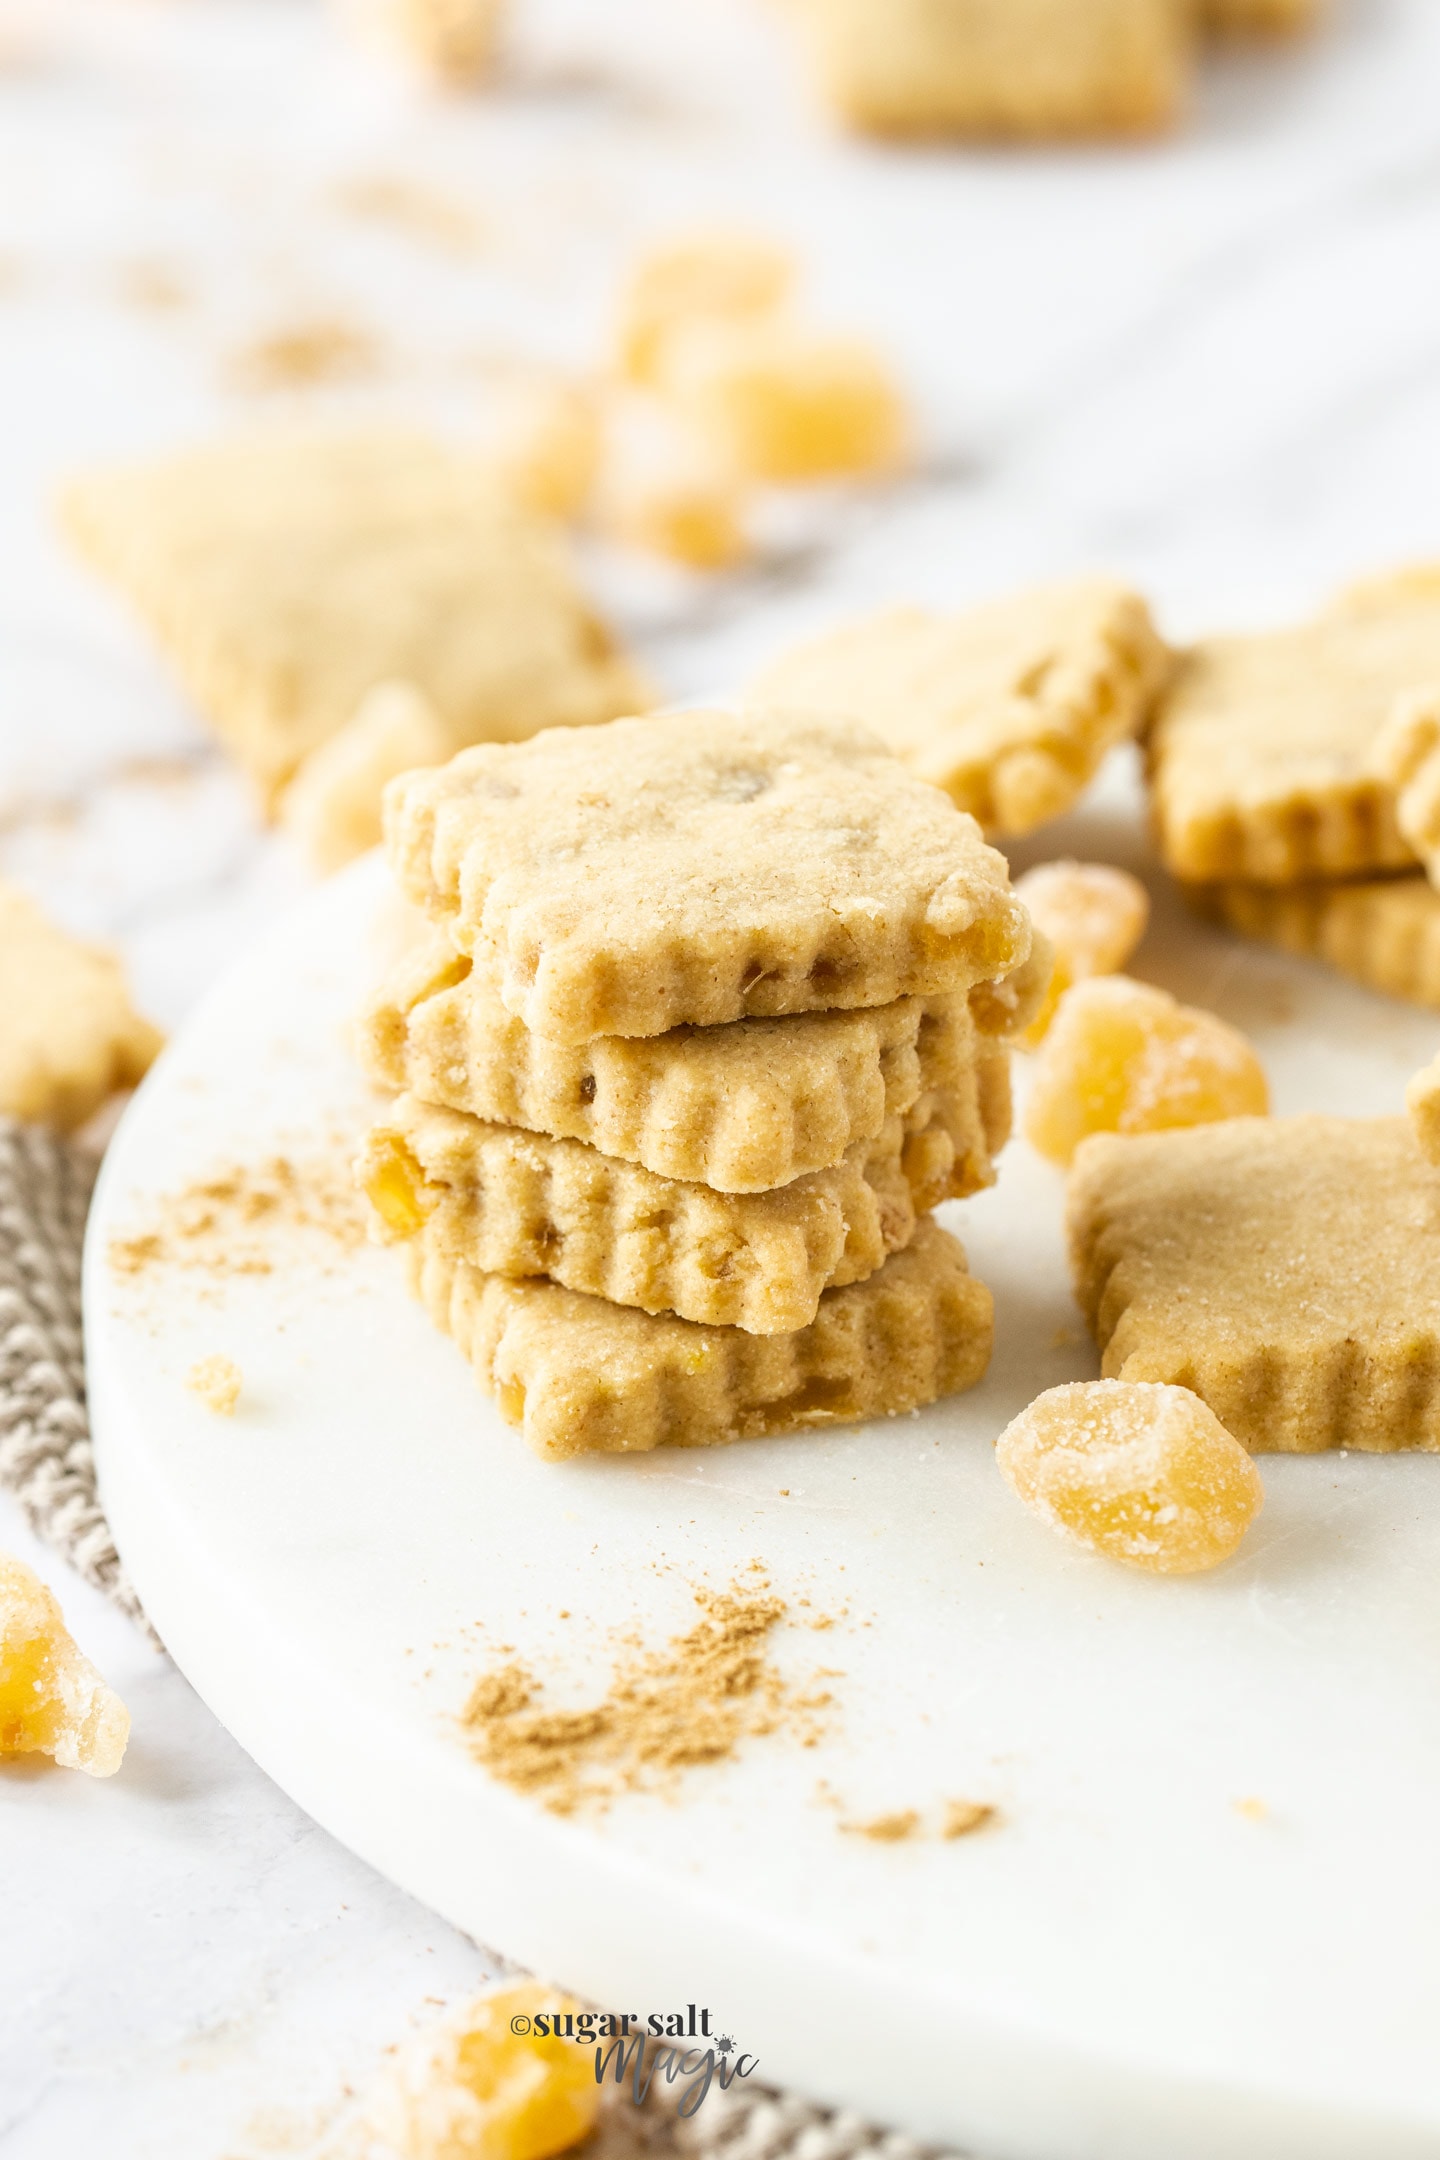 A batch of ginger shortbread surrounded by candied ginger